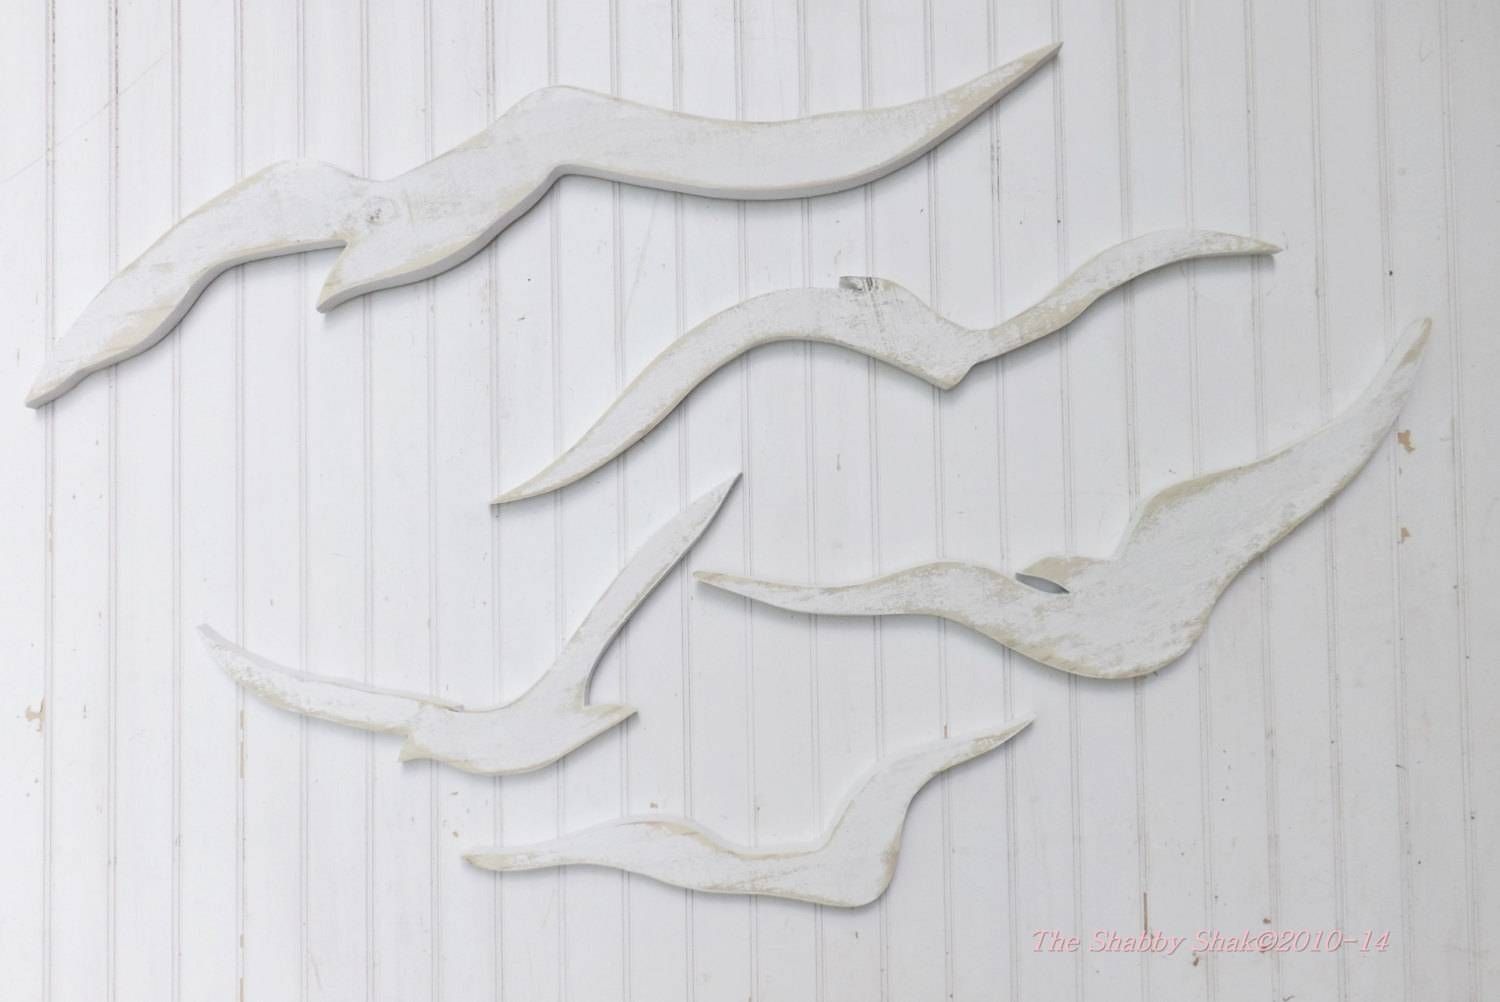 Seagull / Flock Of Seagulls / Seagull Wall Art / Wood Seagull Intended For Latest Metal Wall Art Flock Of Seagulls (View 15 of 30)